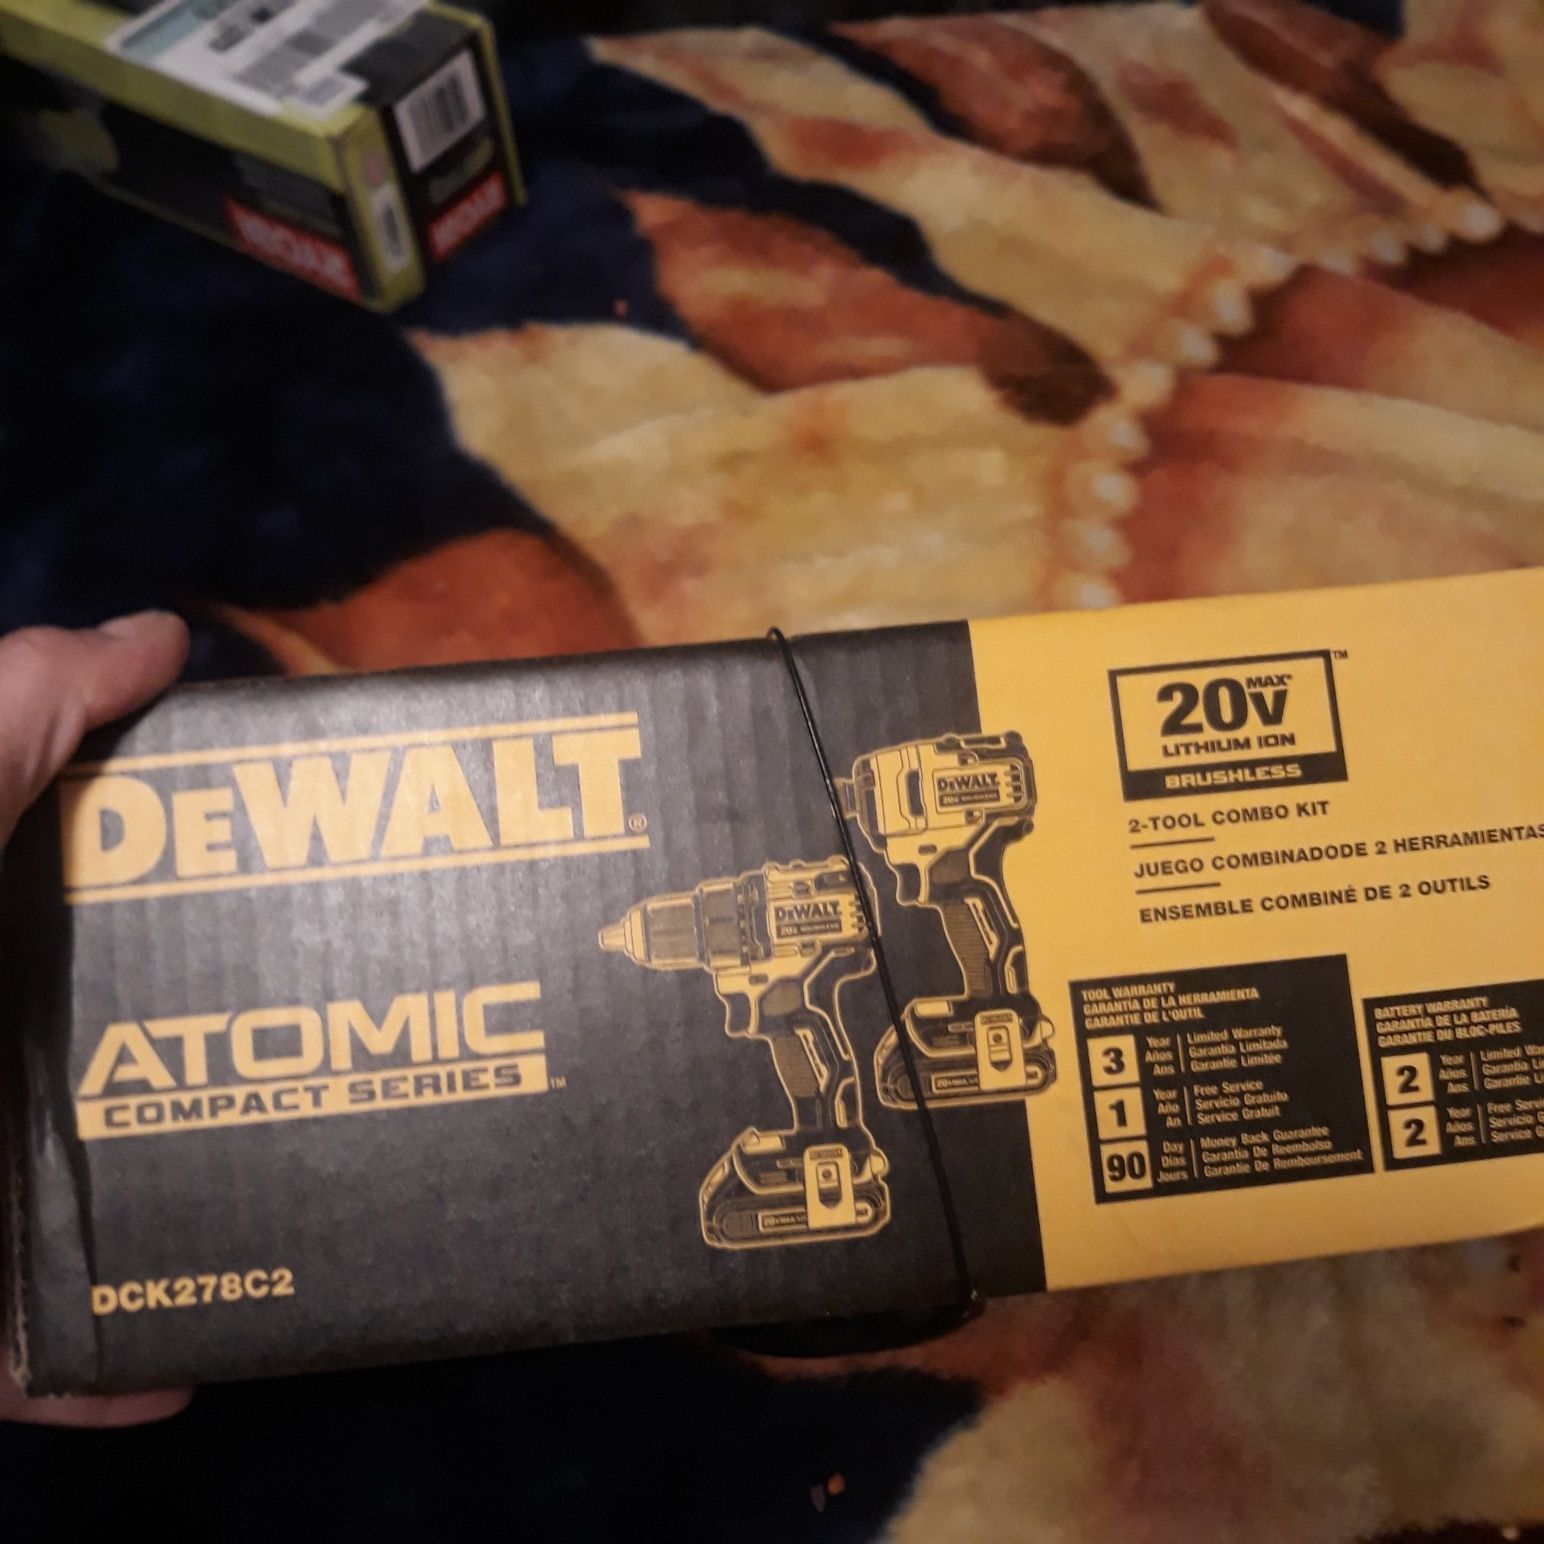 Dewalt 20v compact impact and drill